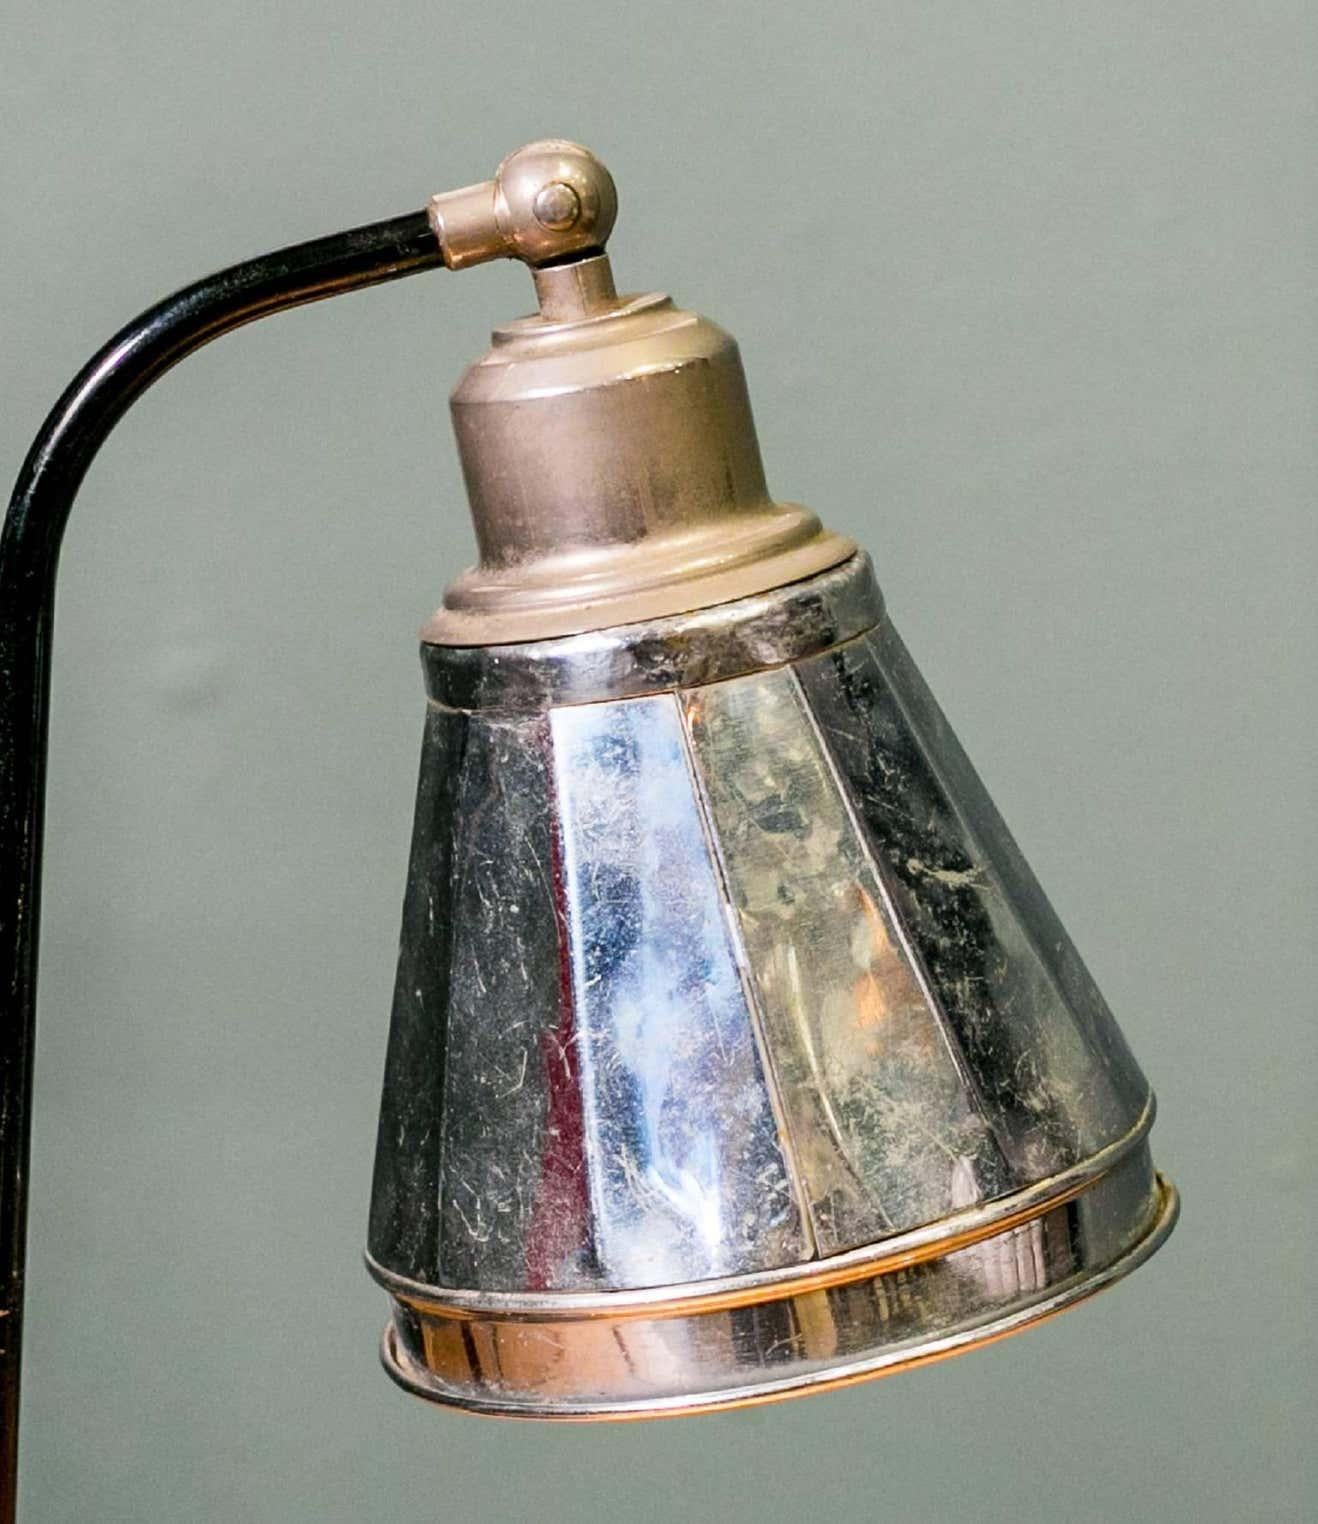 Charming petite vintage table lamp with original on/off toggle on the base and paint. Nickel-plated brass shade is highly reflective. Would make a great desk lamp or bedside lamp. Shade tilts up or down. Newly rewired in the USA with all UL listed